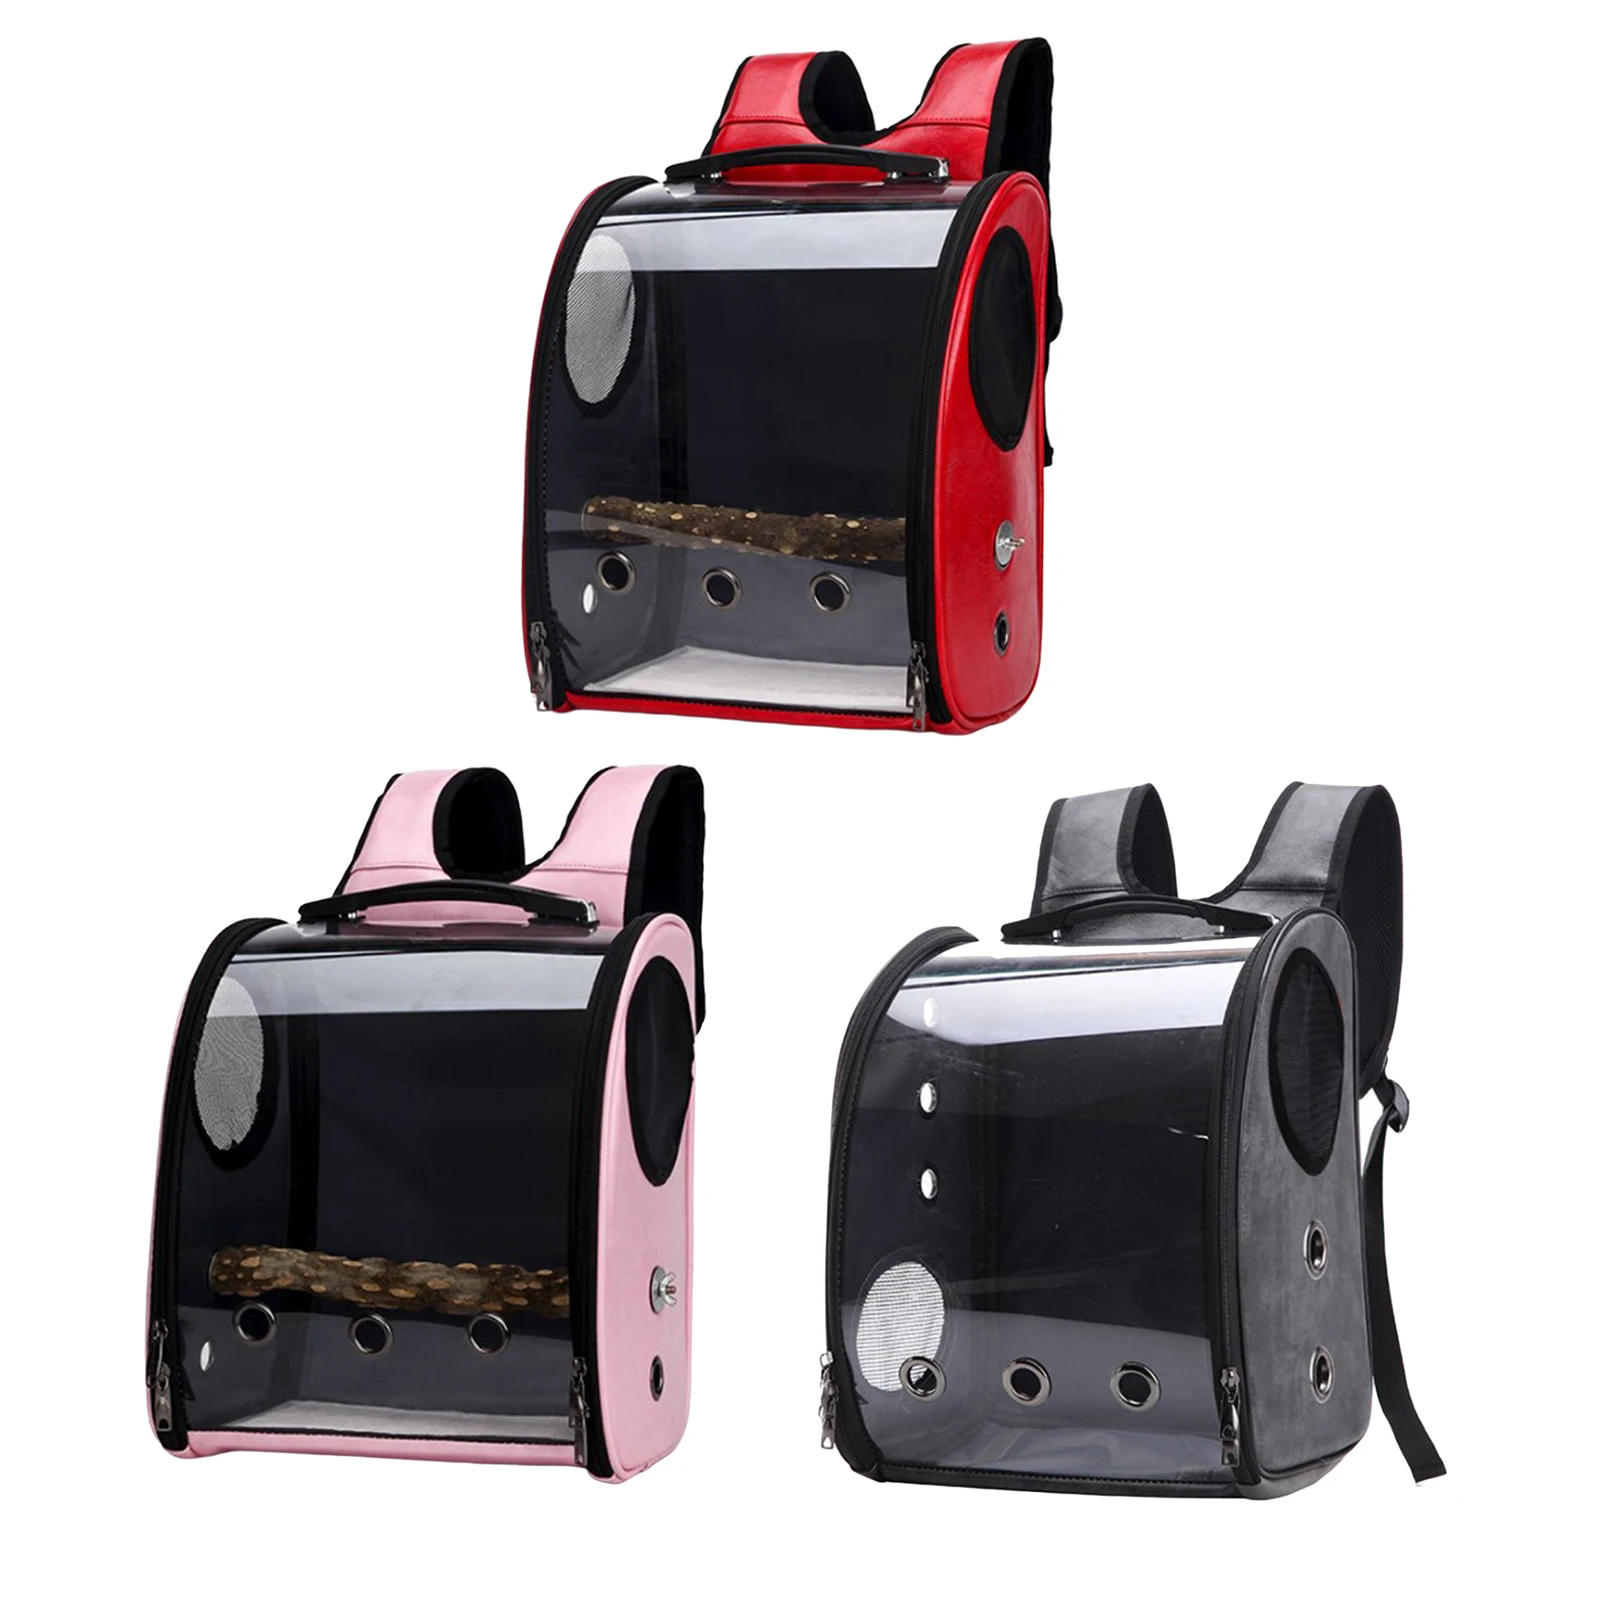 Pet Parrot Bird Carrier Travel Bag Space Capsule Transparent Cover Backpack Breathable